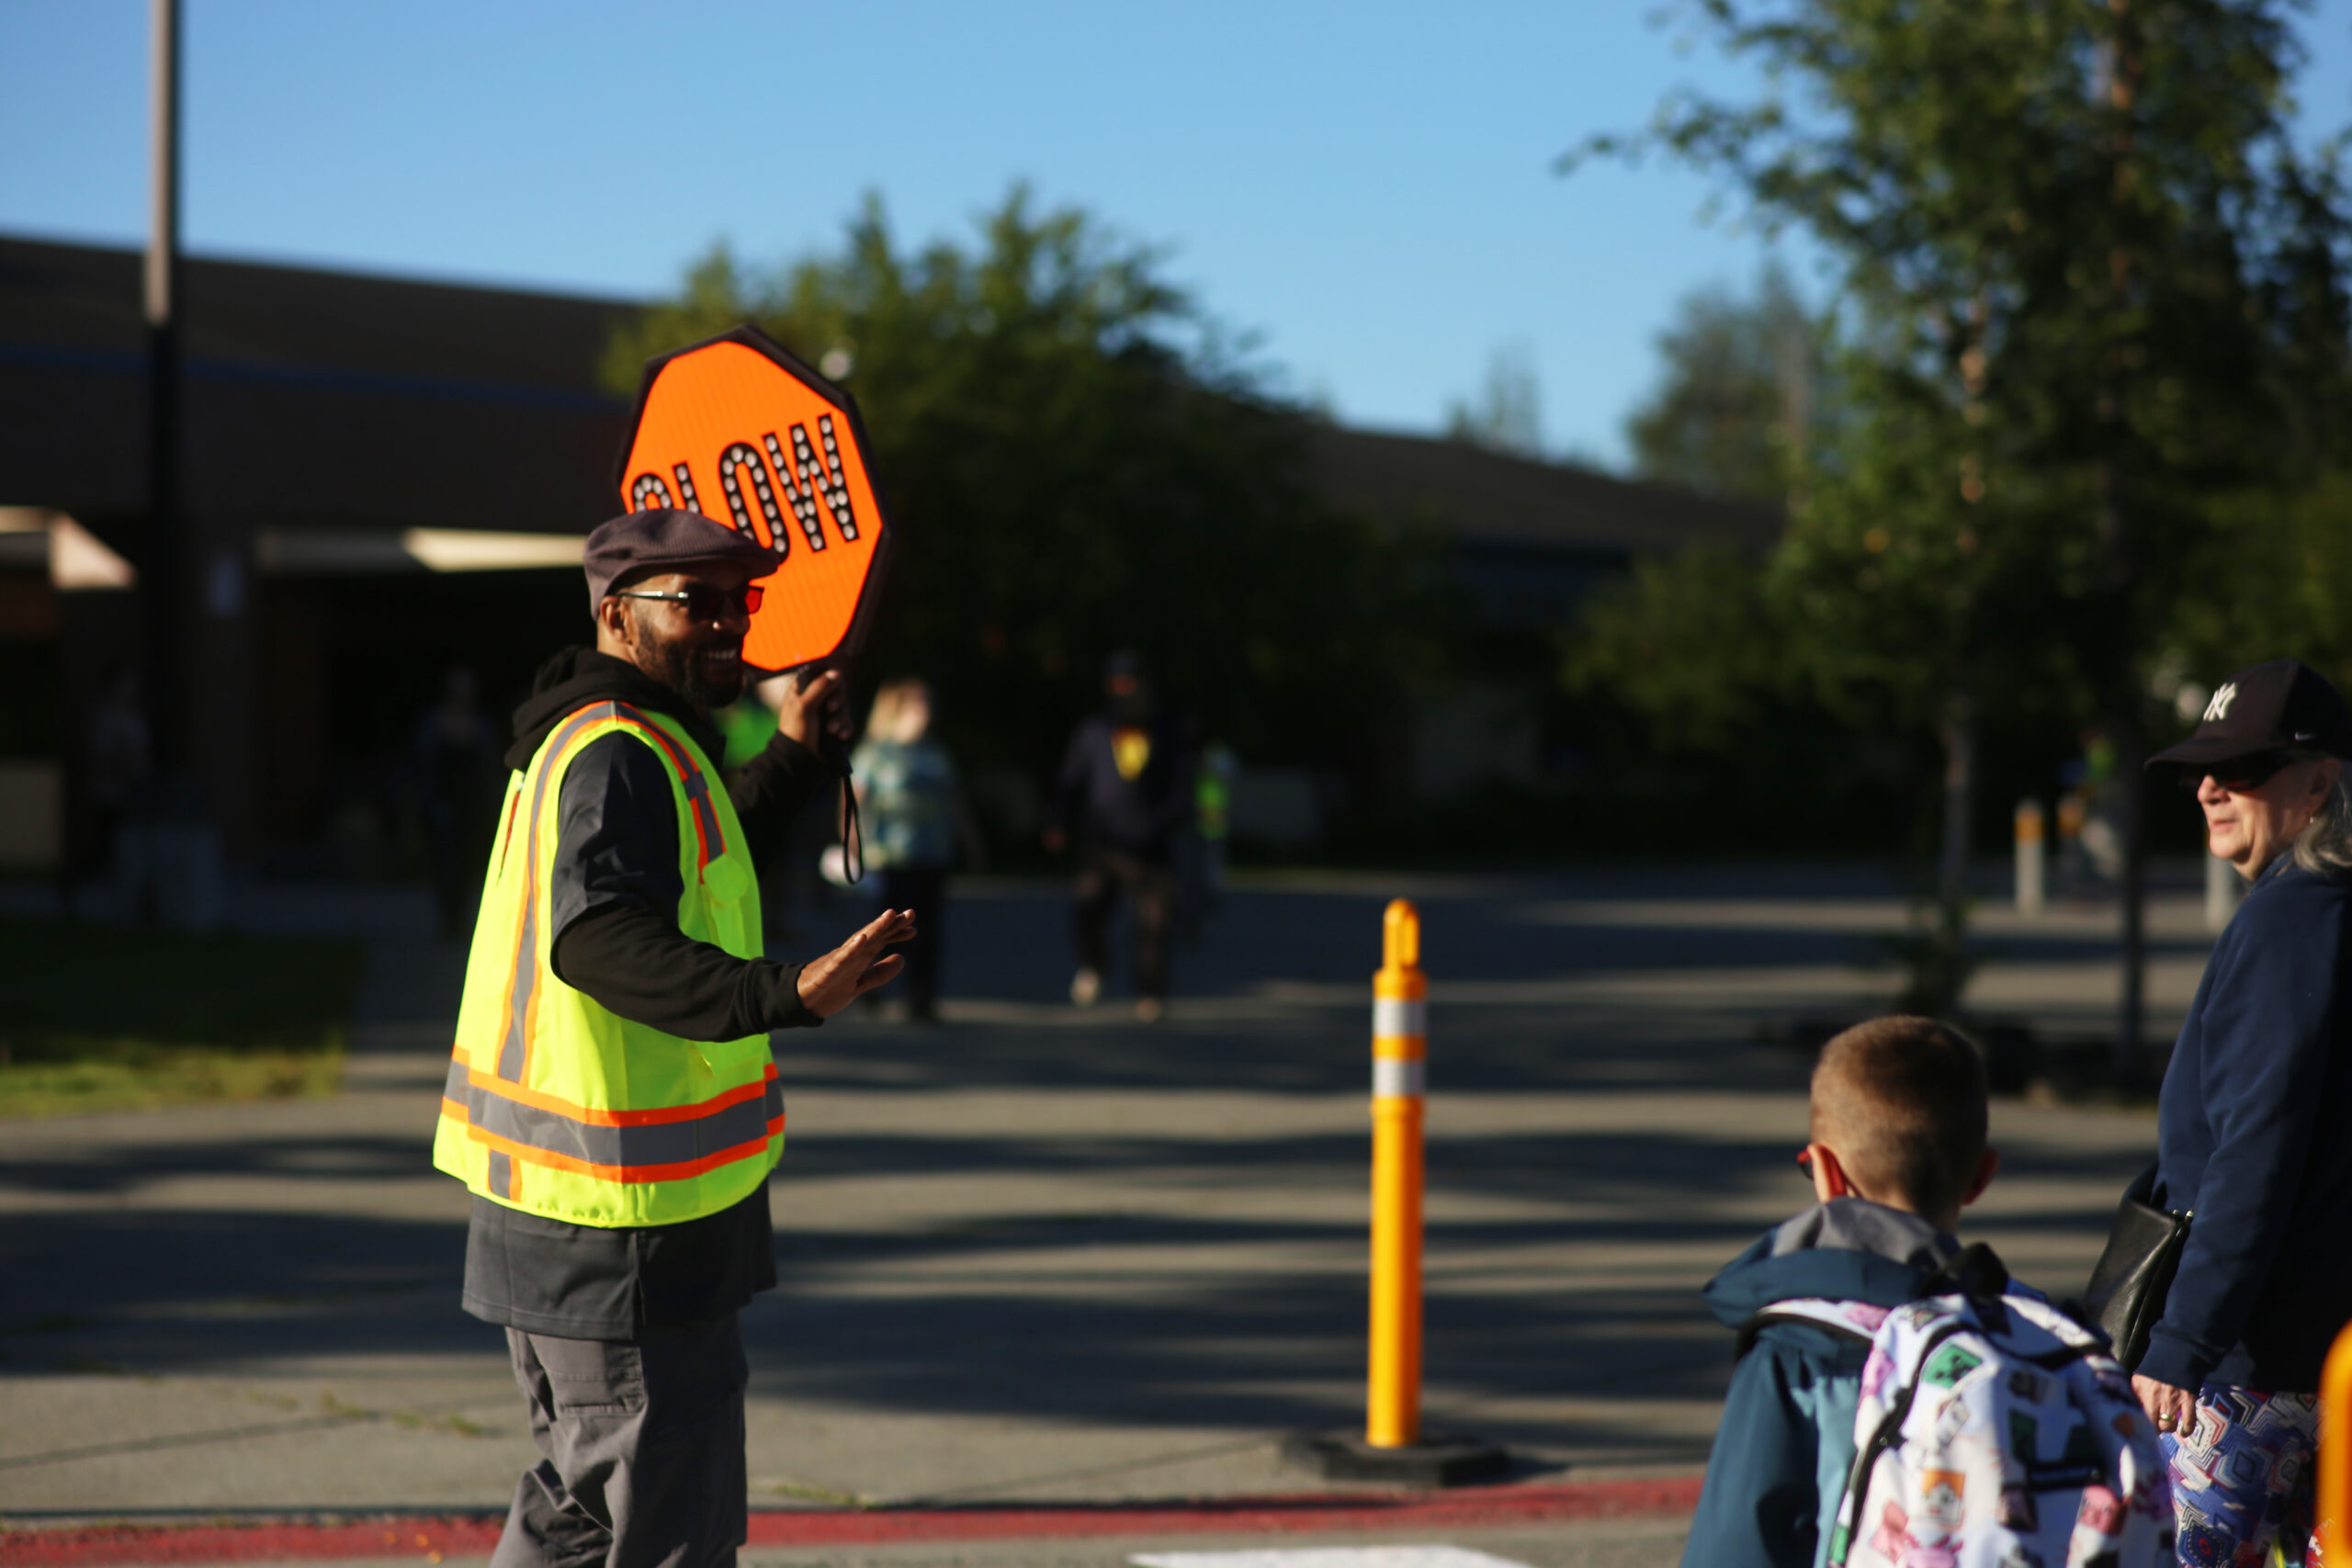 Ryan Marcey holds a stop sign and greets a student and parent as they cross